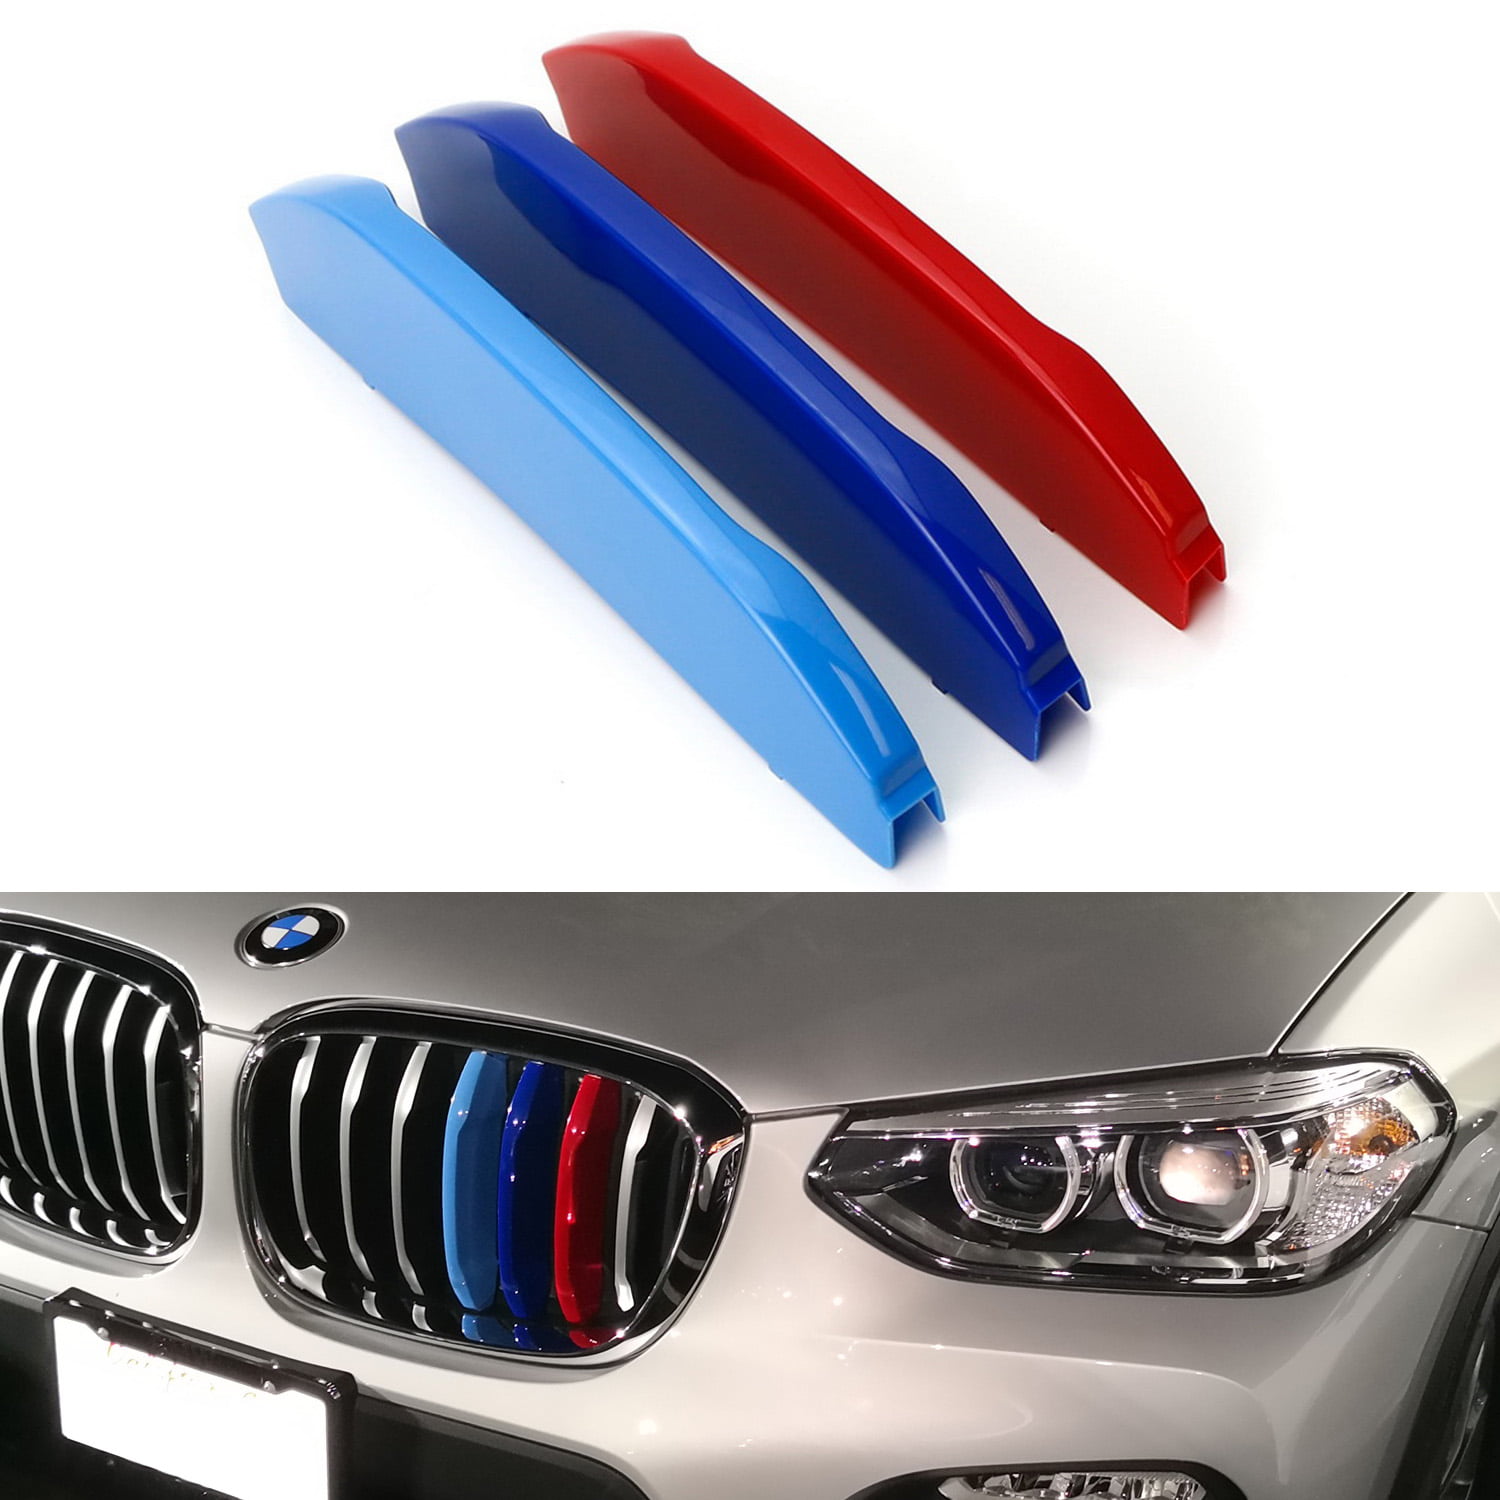 carado for BMW X3 G01 2018 7 Grille M Color BMW Grill Stripes Front Grille Grill Cover Insert Trim Clips 3Pcs